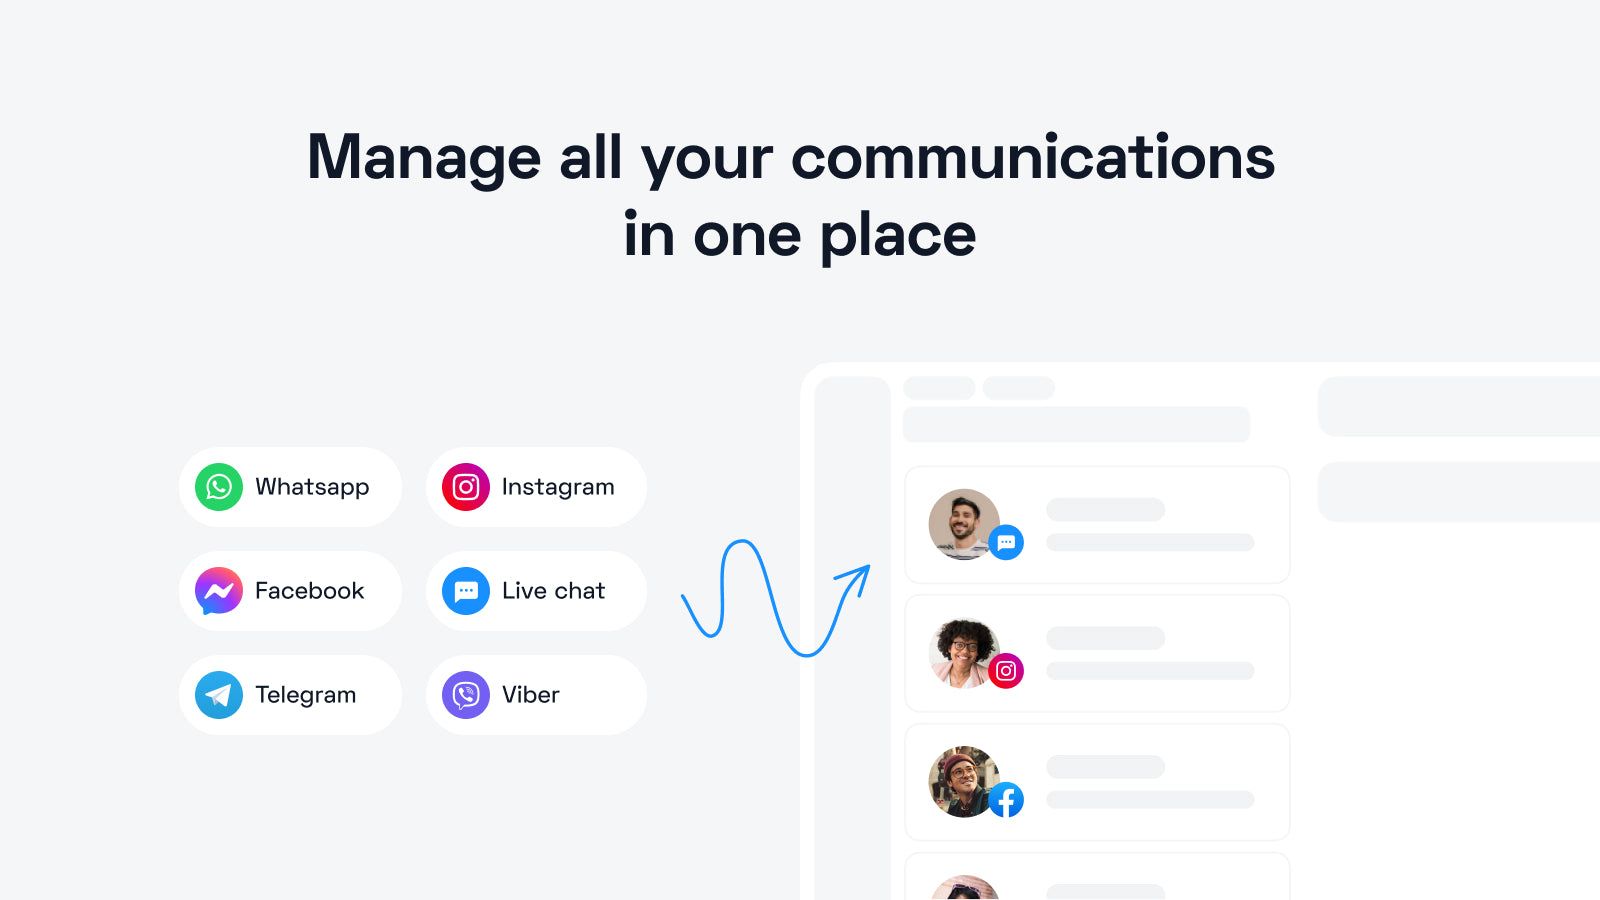 Manage all your communications in one place